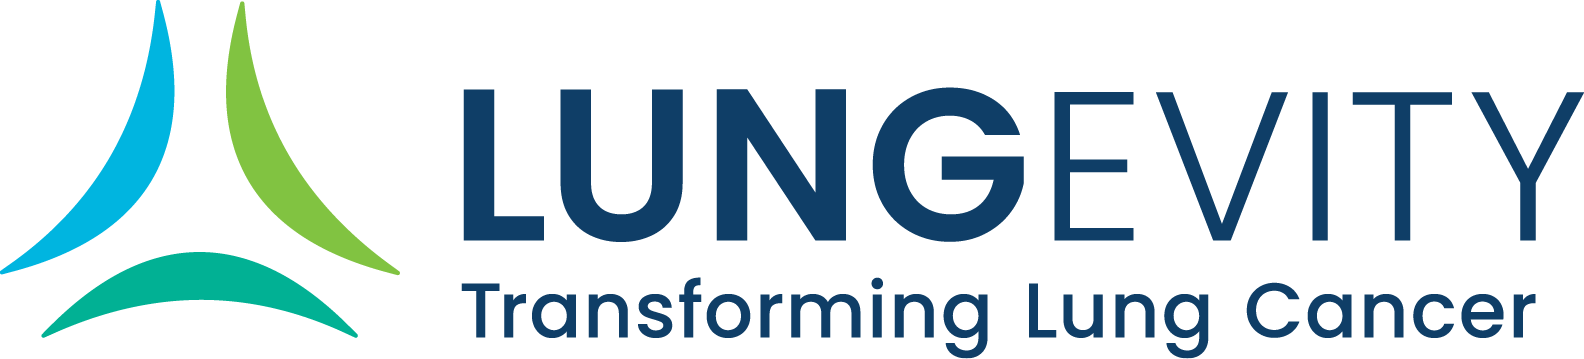 Lungevity Transforming Lung Cancer Logo